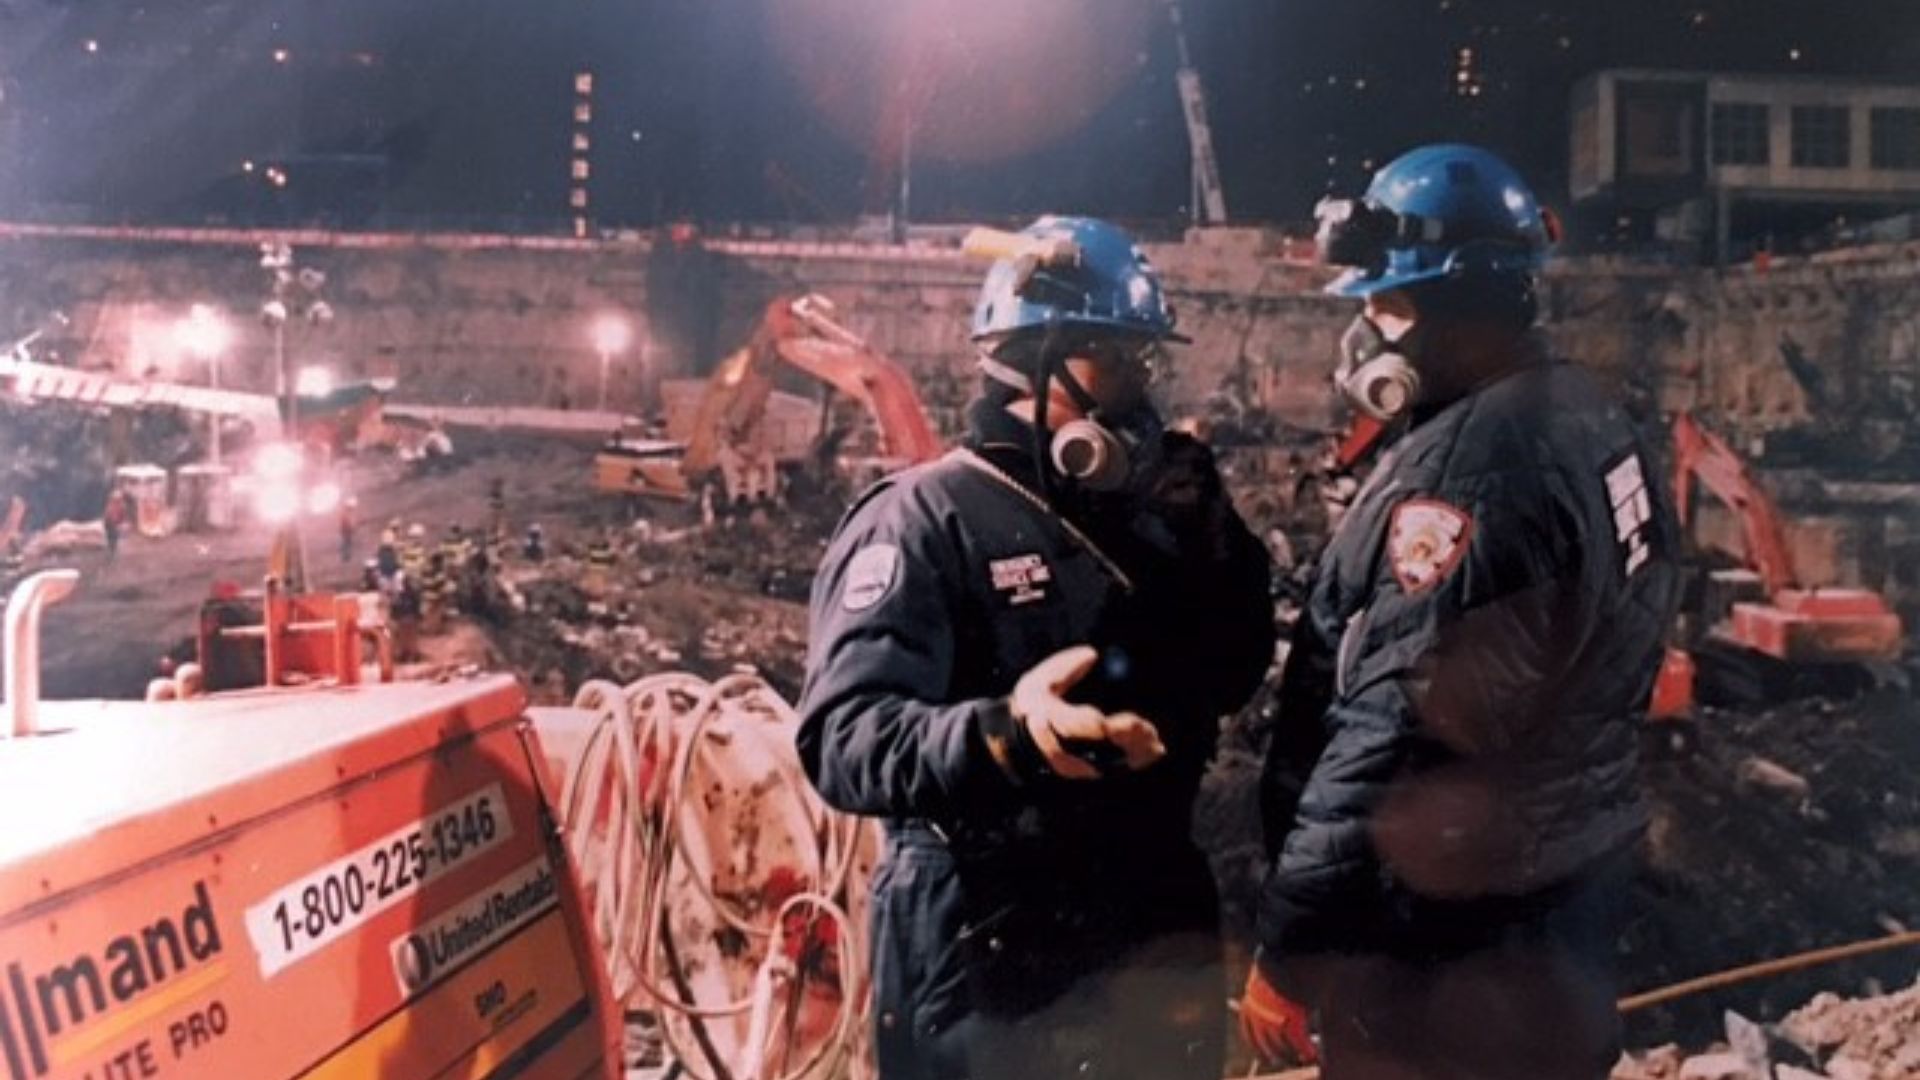 Department of Correction workers speak with protective face masks at Ground Zero. Cranes are visible in the background. 